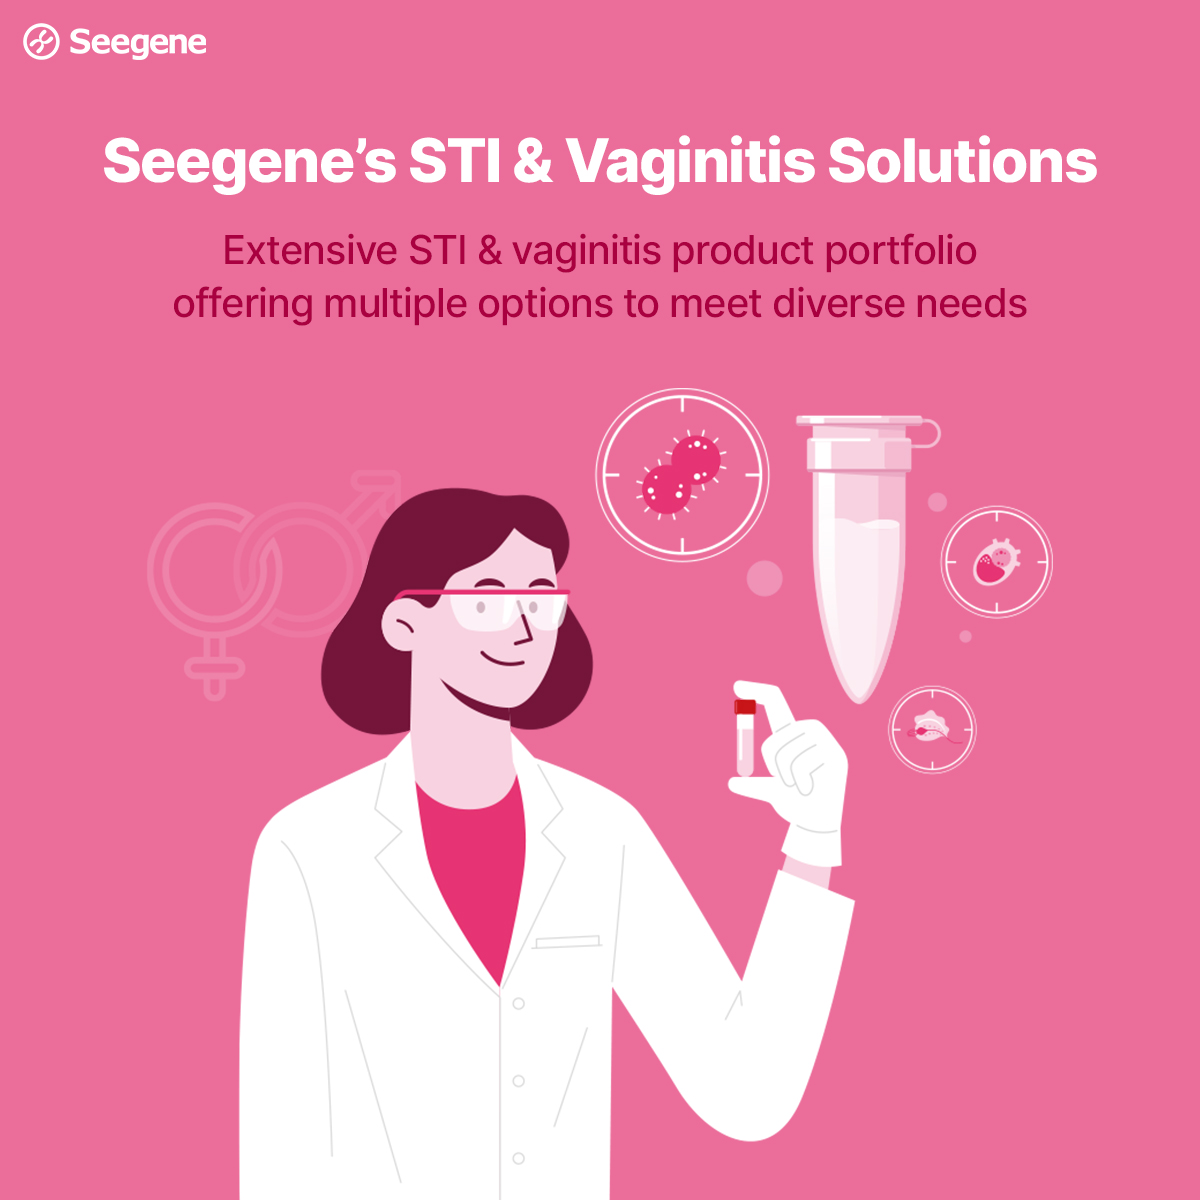 Experience Seegene for precise testing solutions to effectively manage STIs and vaginitis. Our range of assays enables rapid screening for a wide array of STI & Vaginitis pathogens, including bacteria, fungi, viruses, and parasites, as well as detection of antimicrobial…